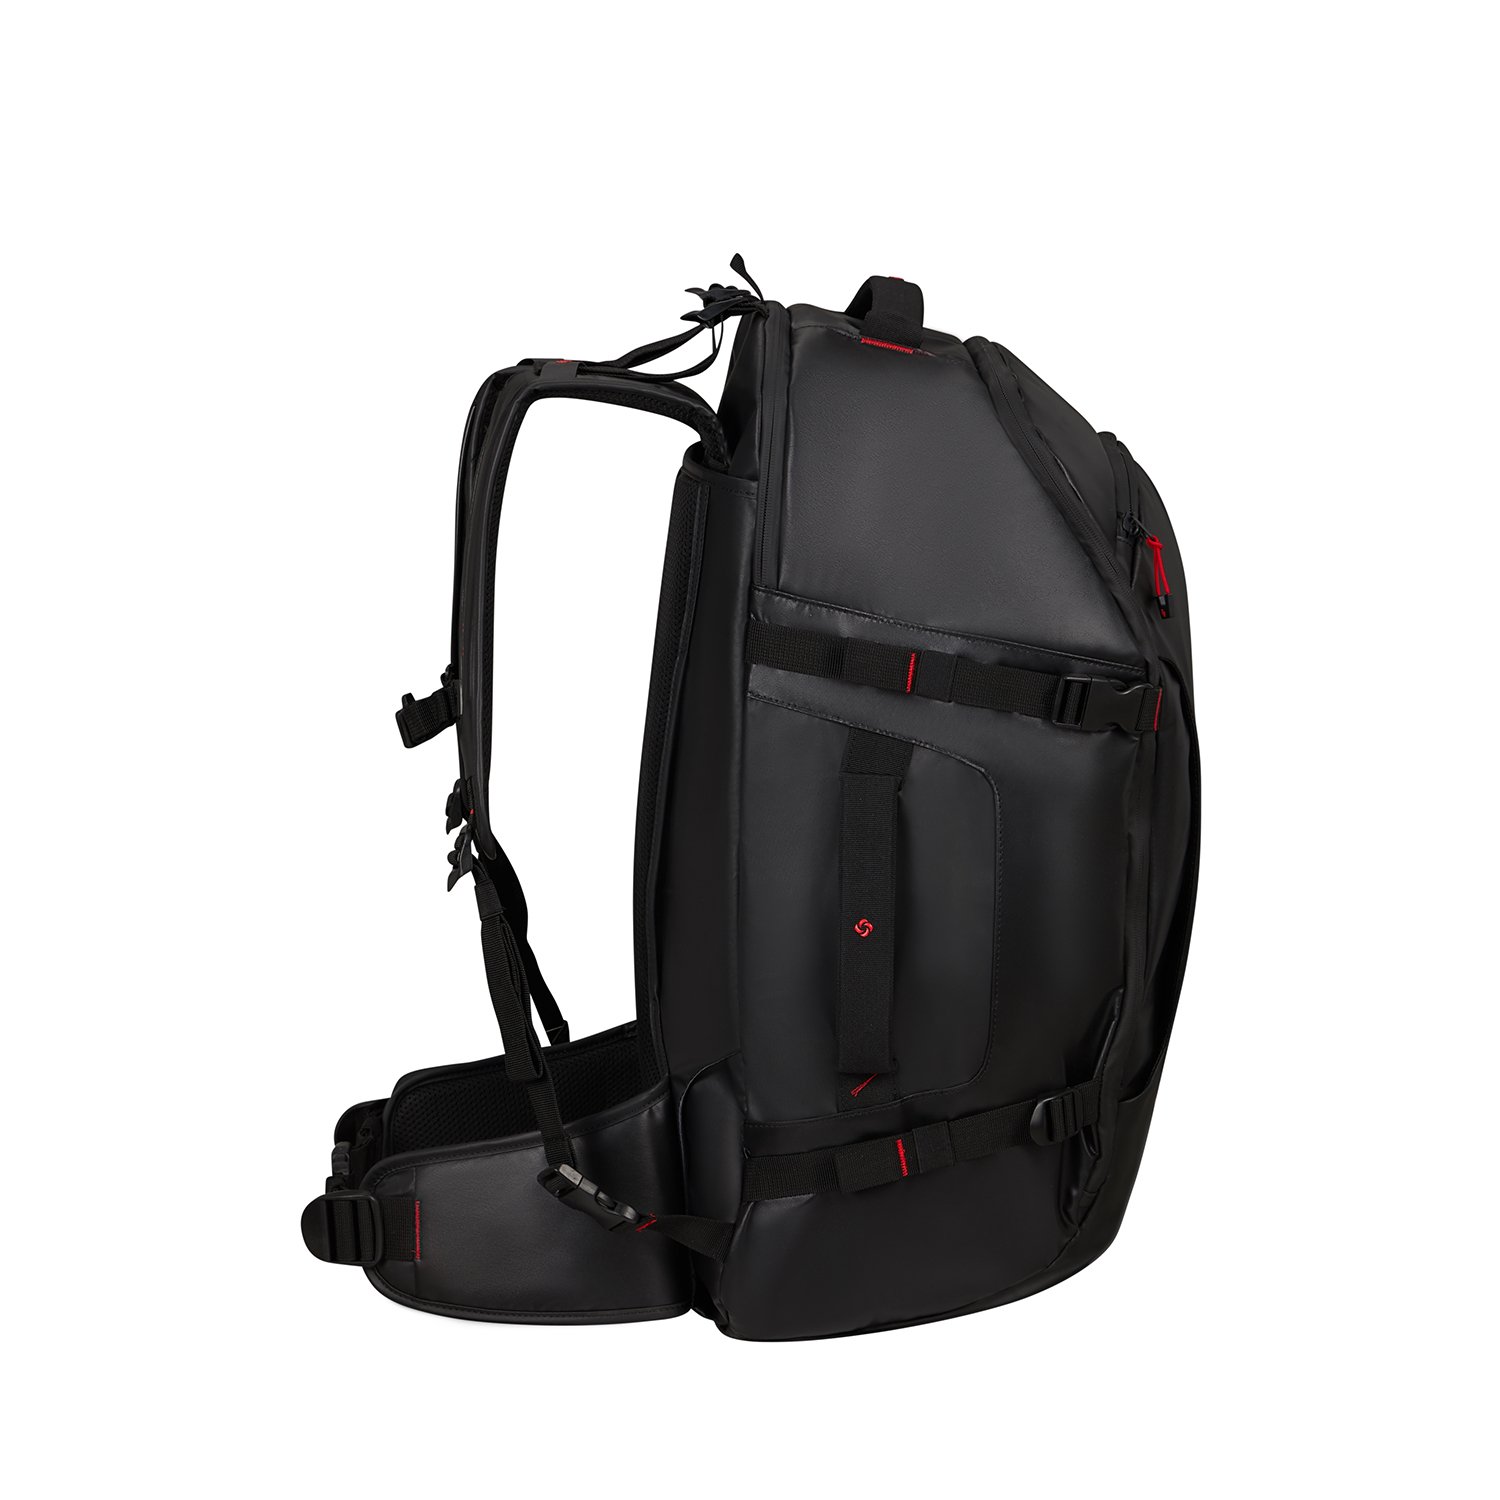 ECODIVER-TRAVEL BACKPACK M 55L SKH7-018-SF000*09